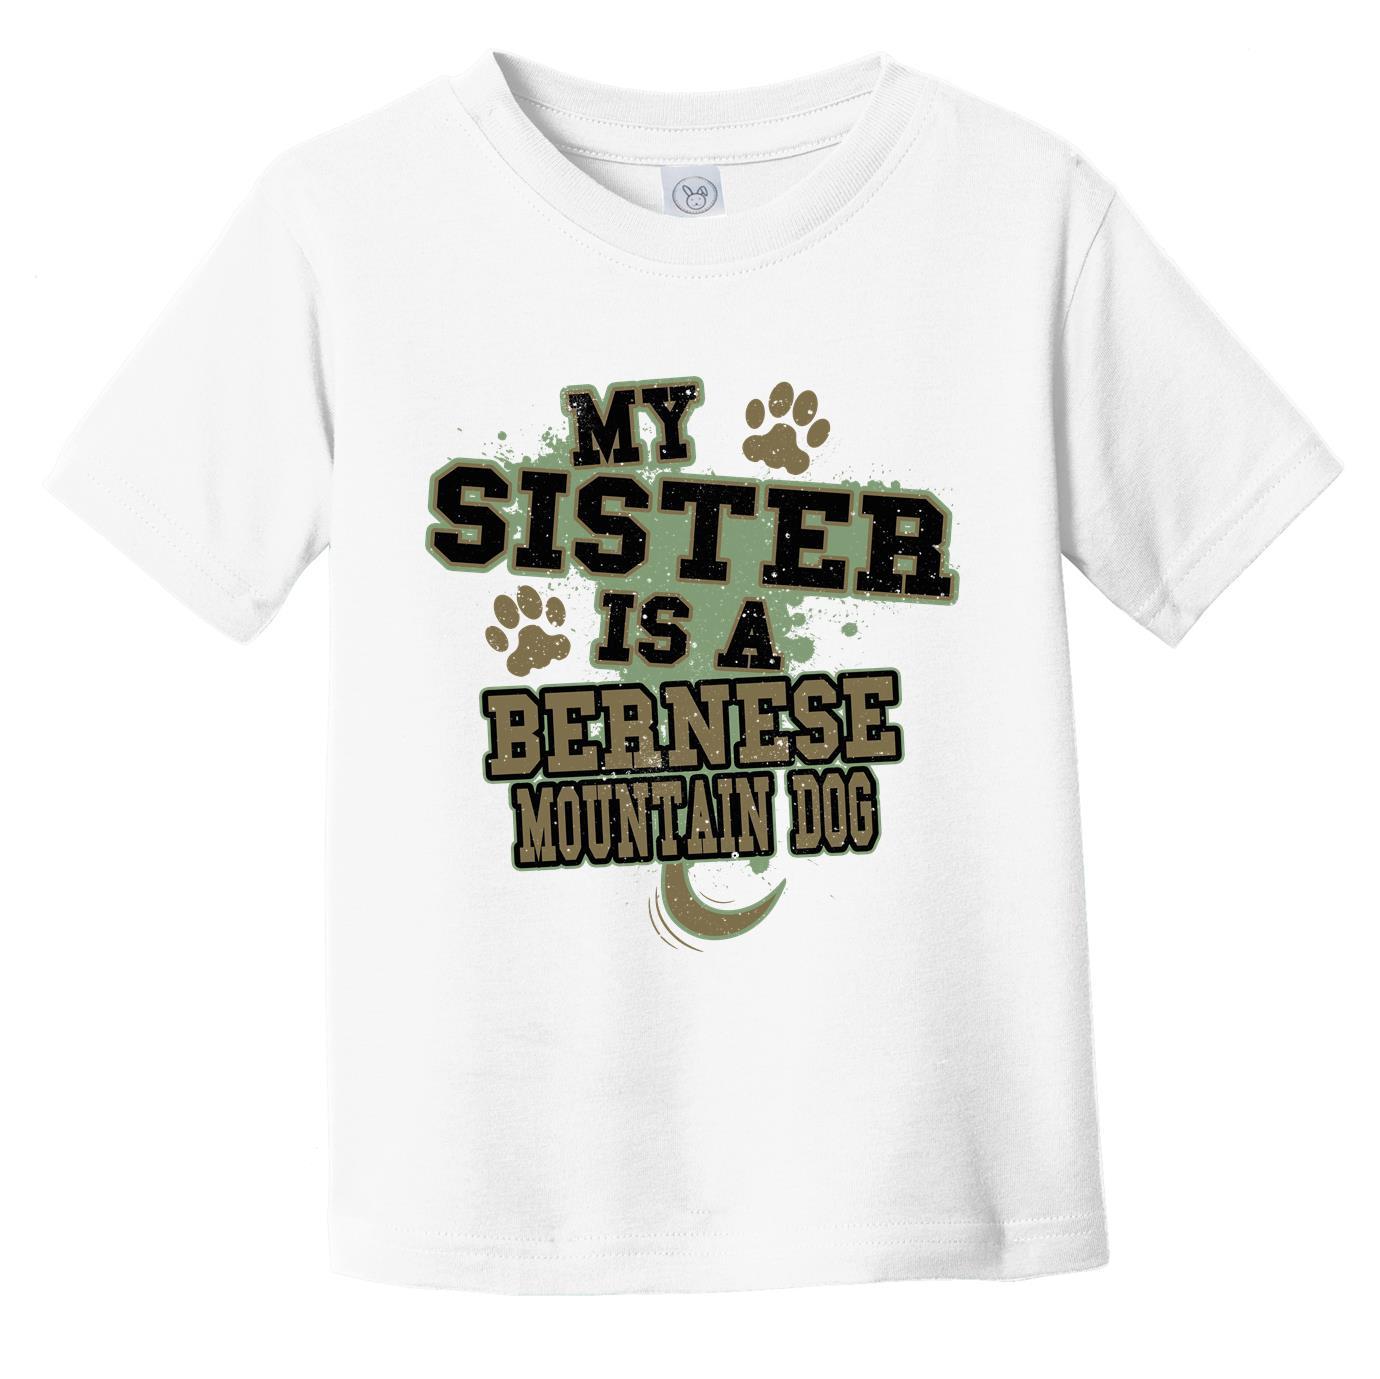 My Sister Is A Bernese Mountain Dog Funny Dog Infant Toddler T-Shirt